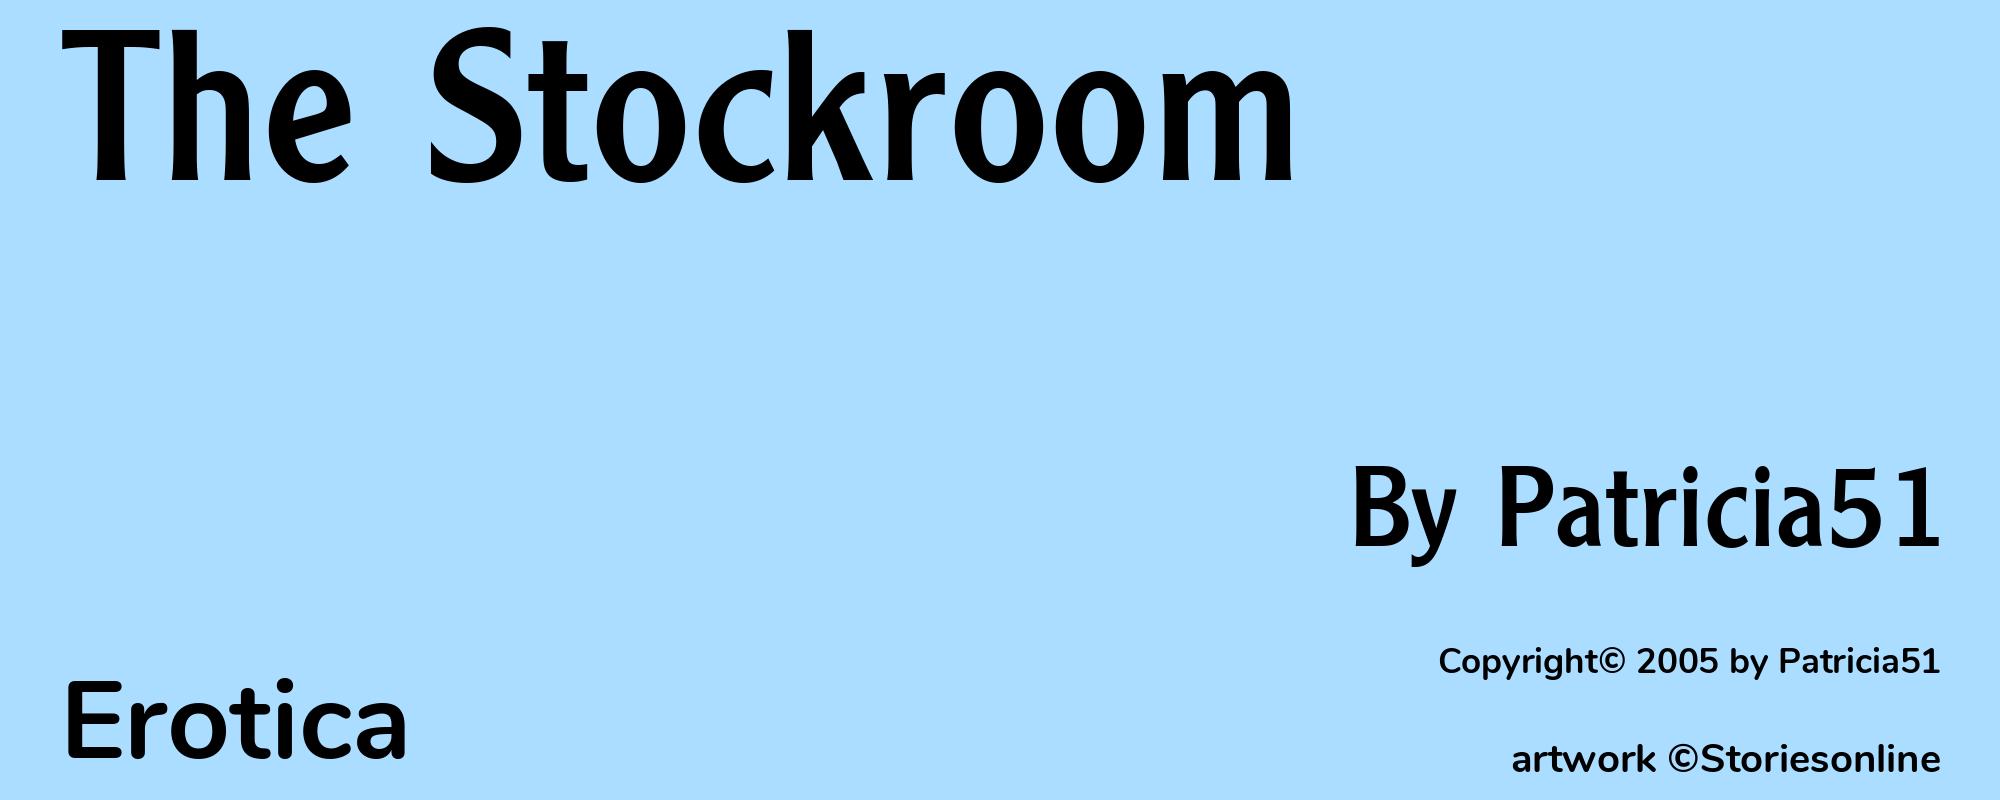 The Stockroom - Cover